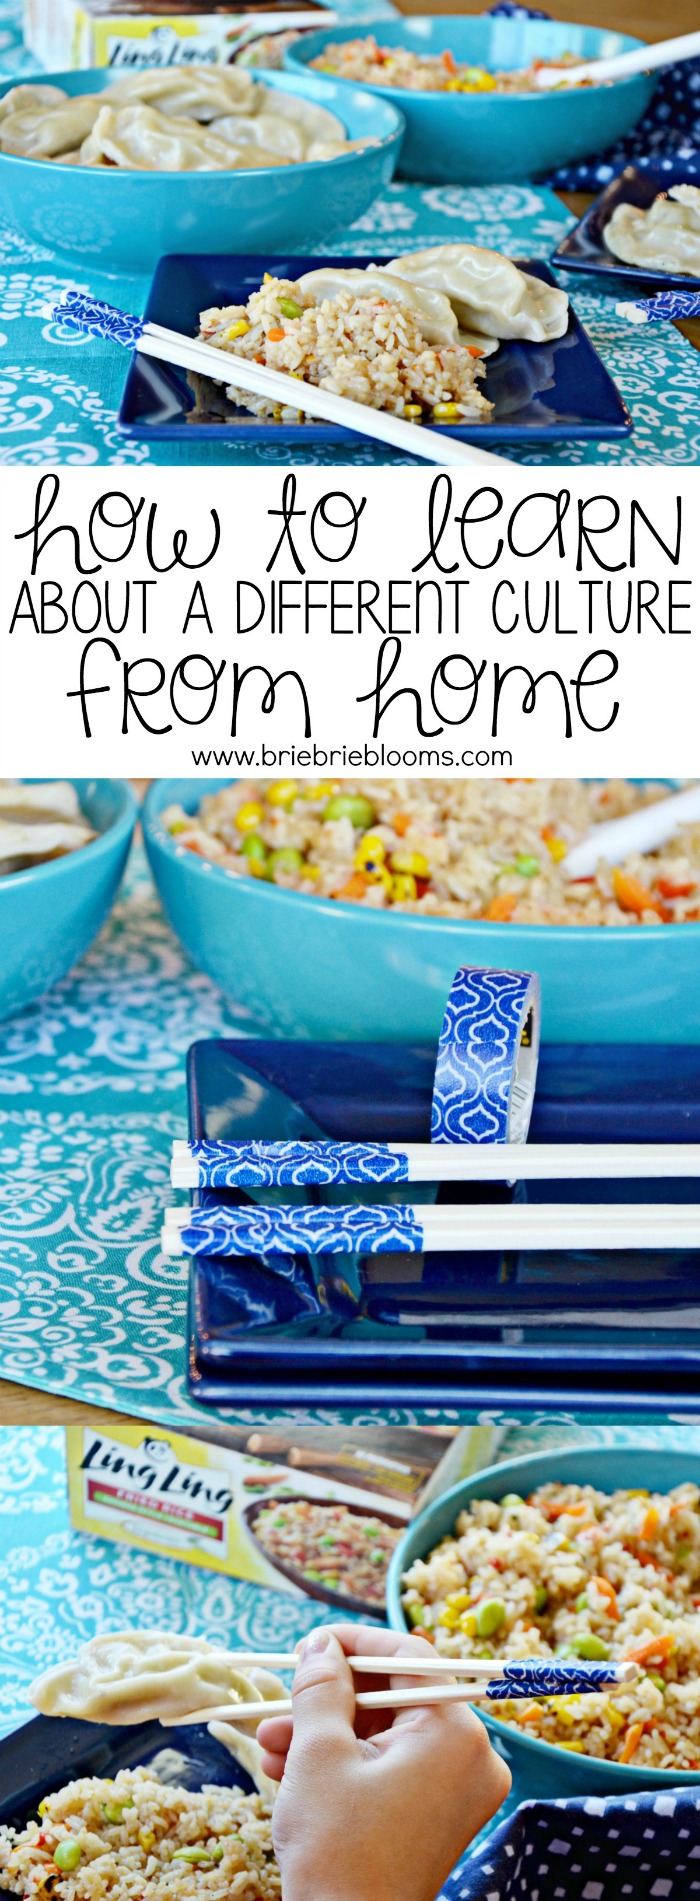 It's easy to make learning about a different culture from home fun!